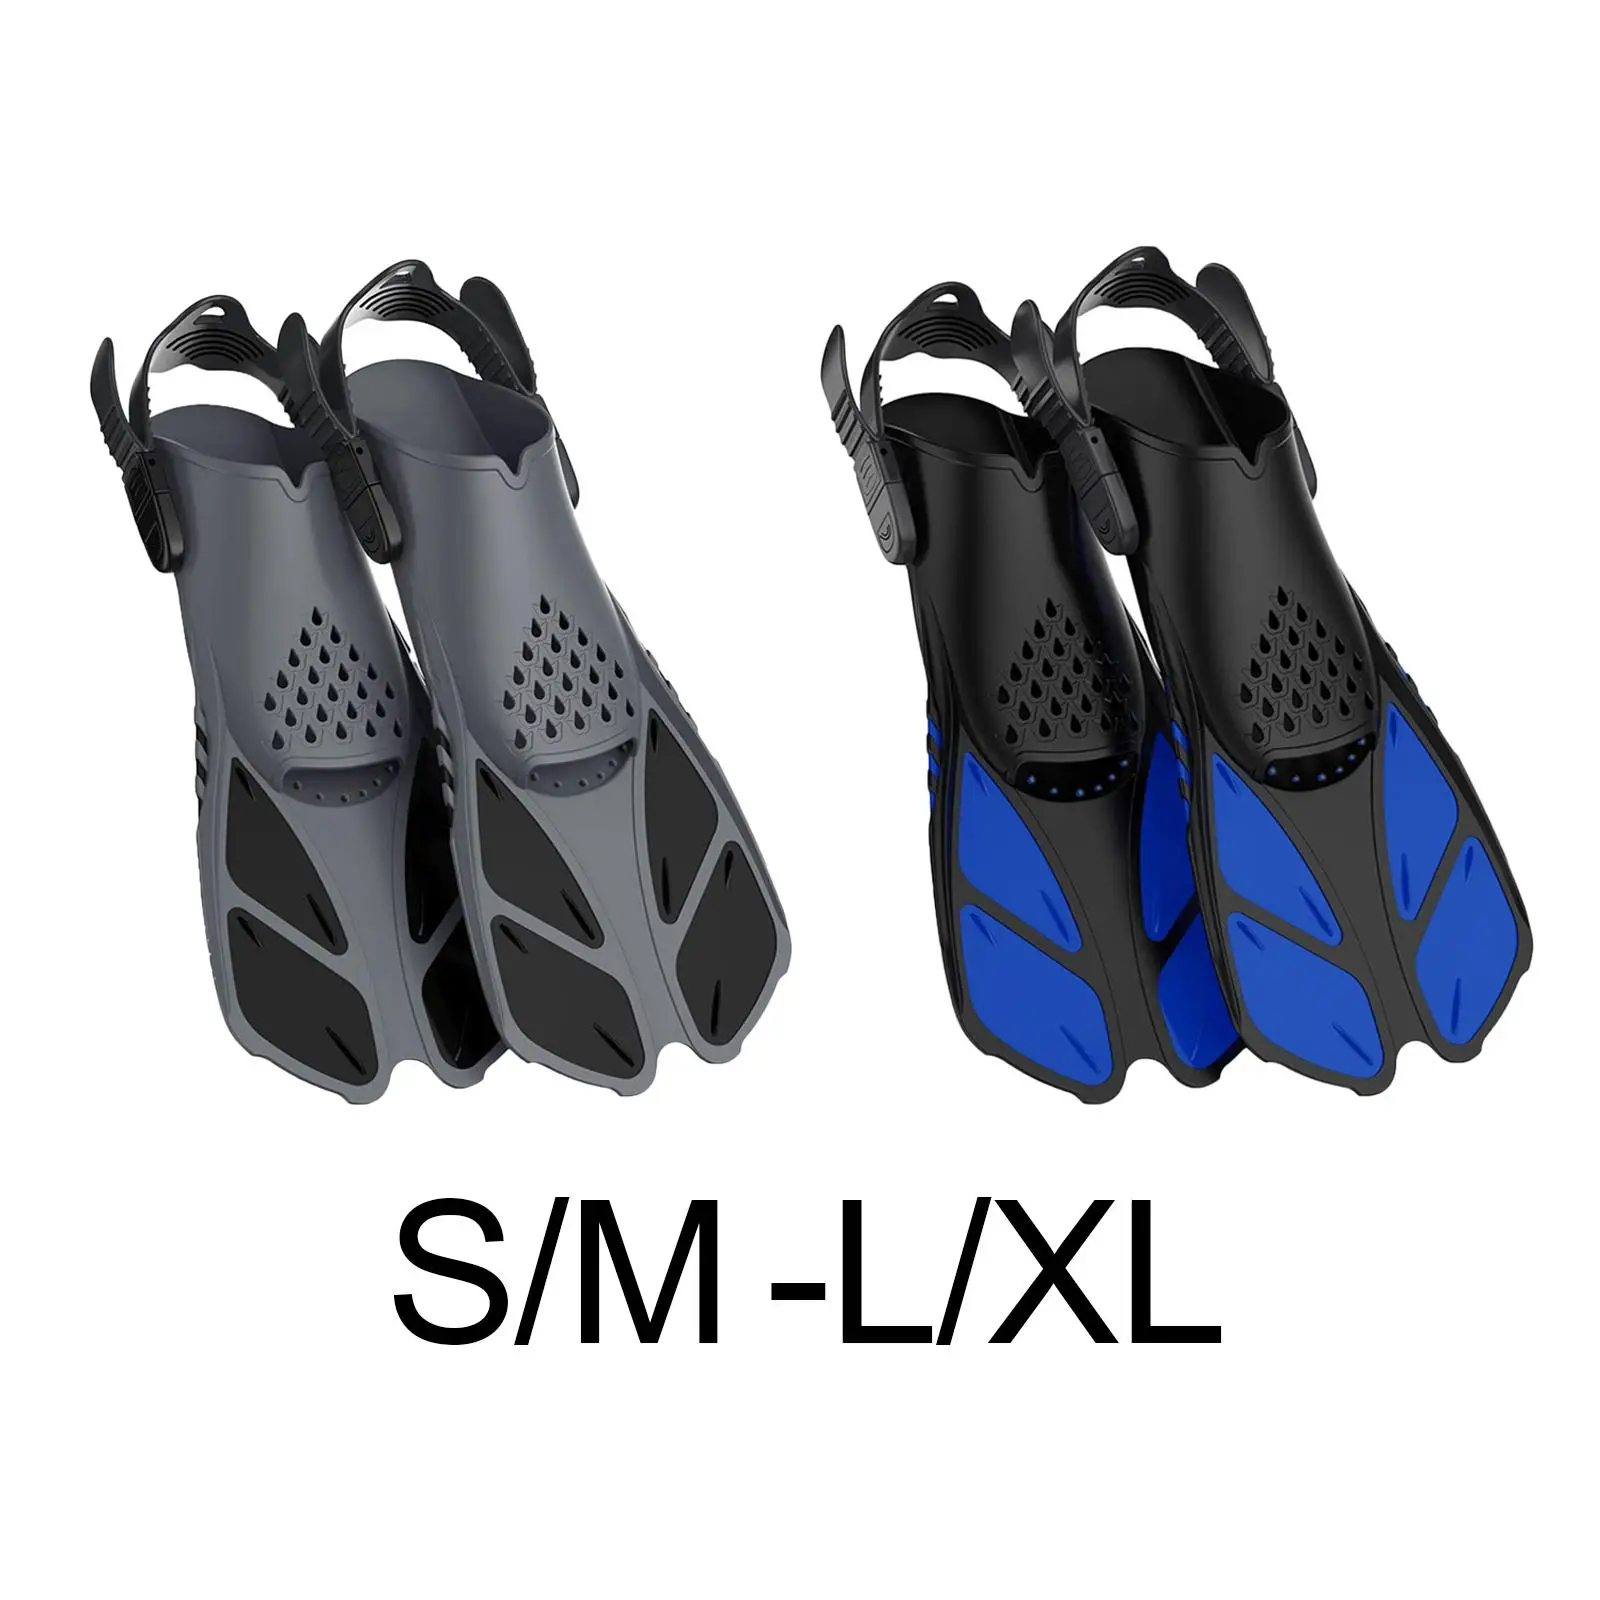 2Pcs Professional Swimming Flippers Feet Shoe for Water Sports, Diving, Scuba